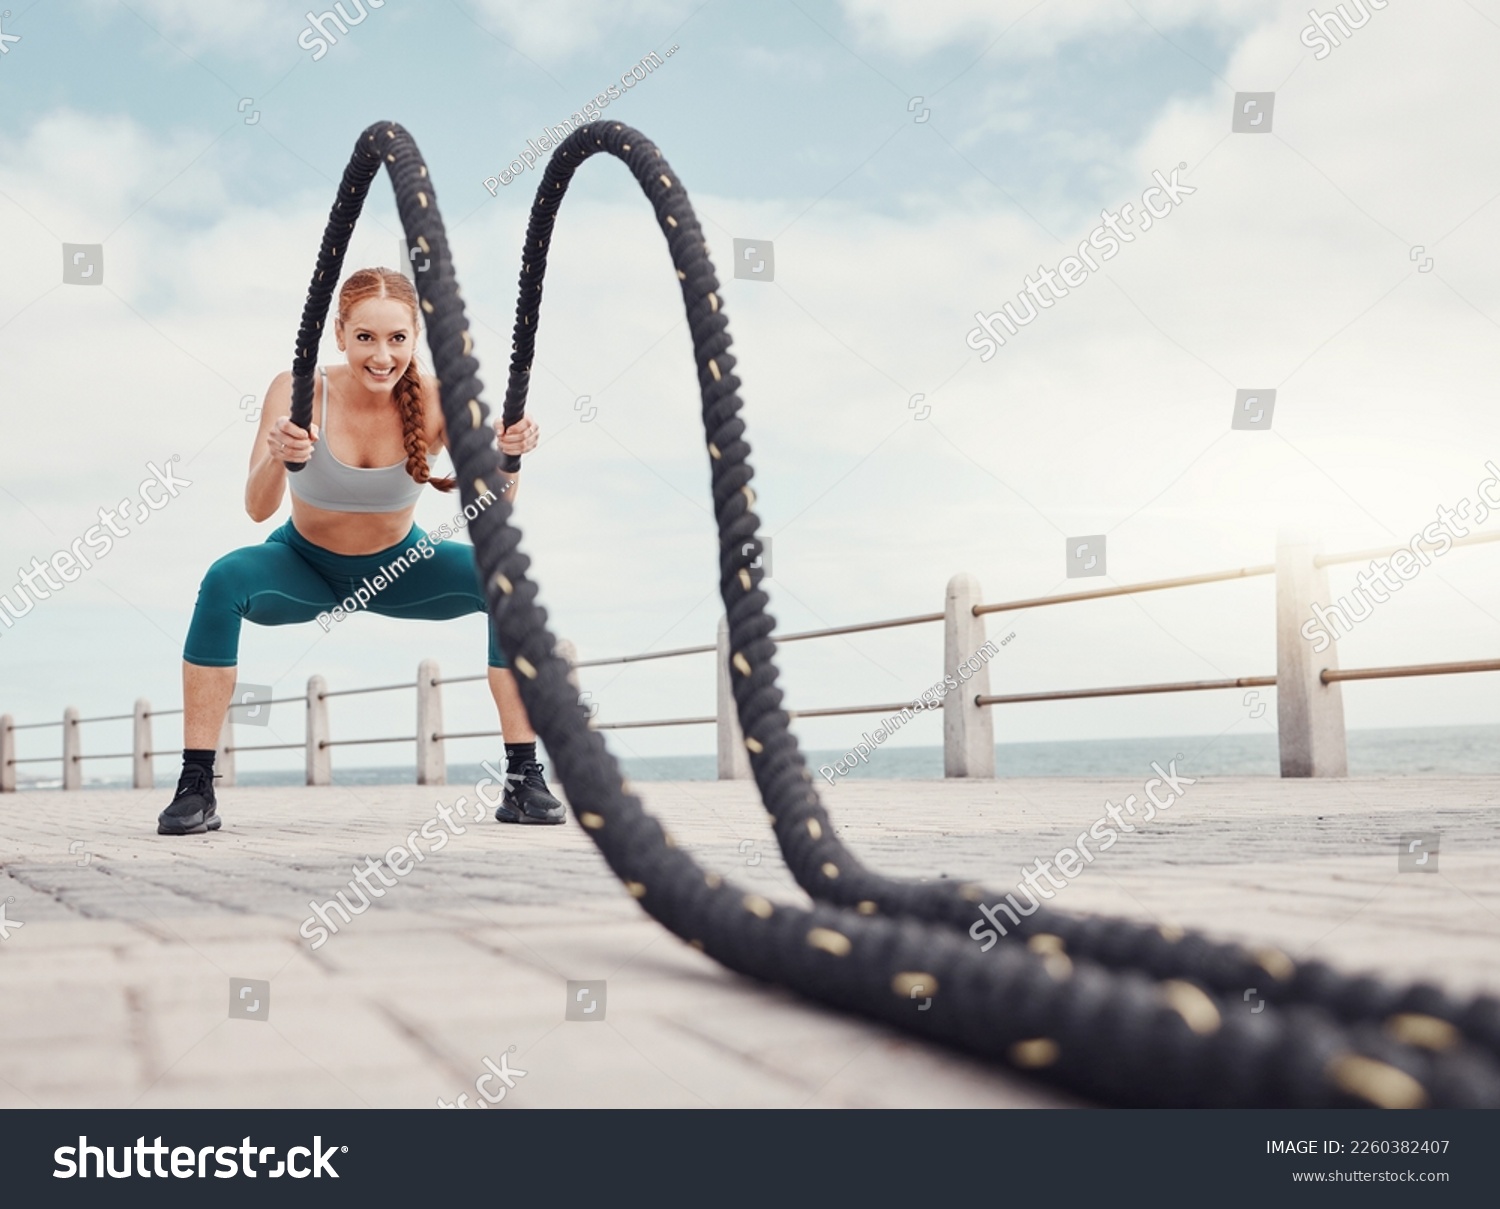 Fitness, woman and battle rope at the beach for intense arm workout, training or exercise in Cape Town. Active female exercising with ropes for cardio, muscle endurance or power in the outdoors #2260382407